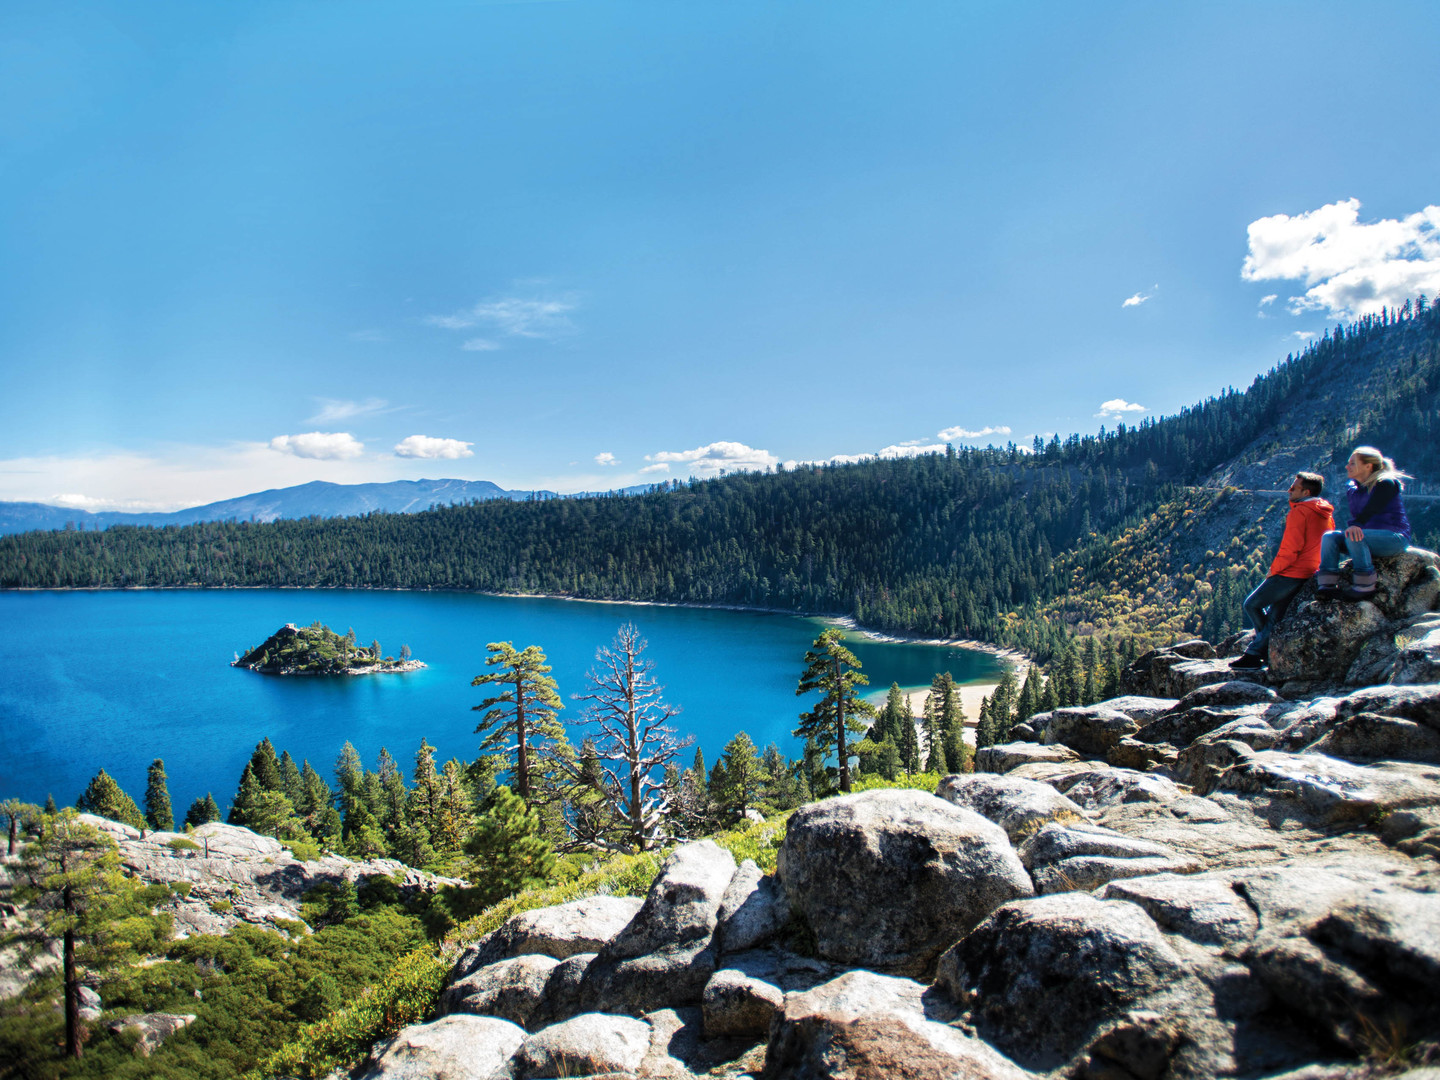 Marriott's Grand Residence Club<span class='trademark'>®</span> 1, Lake Tahoe Lake Tahoe. Marriott's Grand Residence Club<span class='trademark'>®</span> 1, Lake Tahoe is located in South Lake Tahoe, California United States.